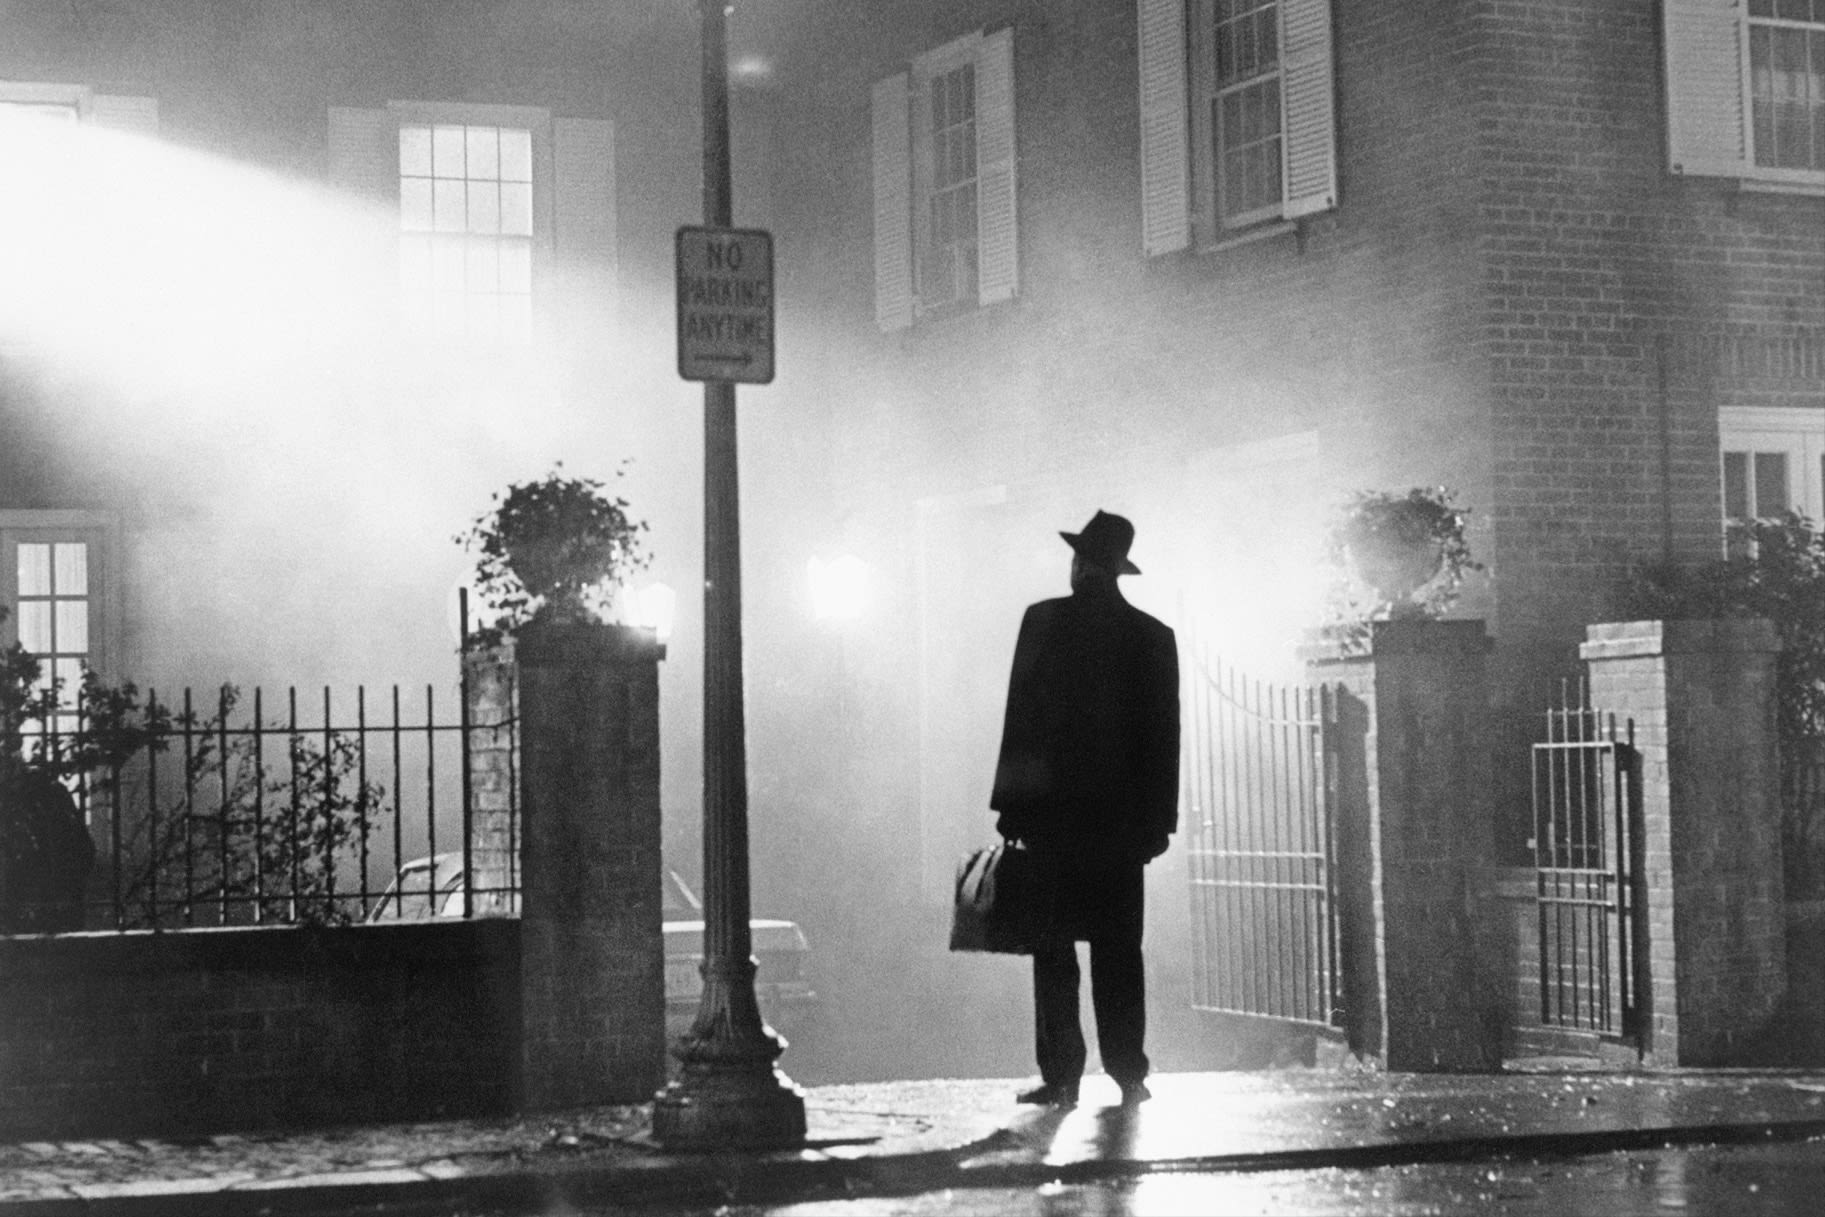 Mike Flanagan Teases His New Exorcist Movie: "This Should Be Really Scary"